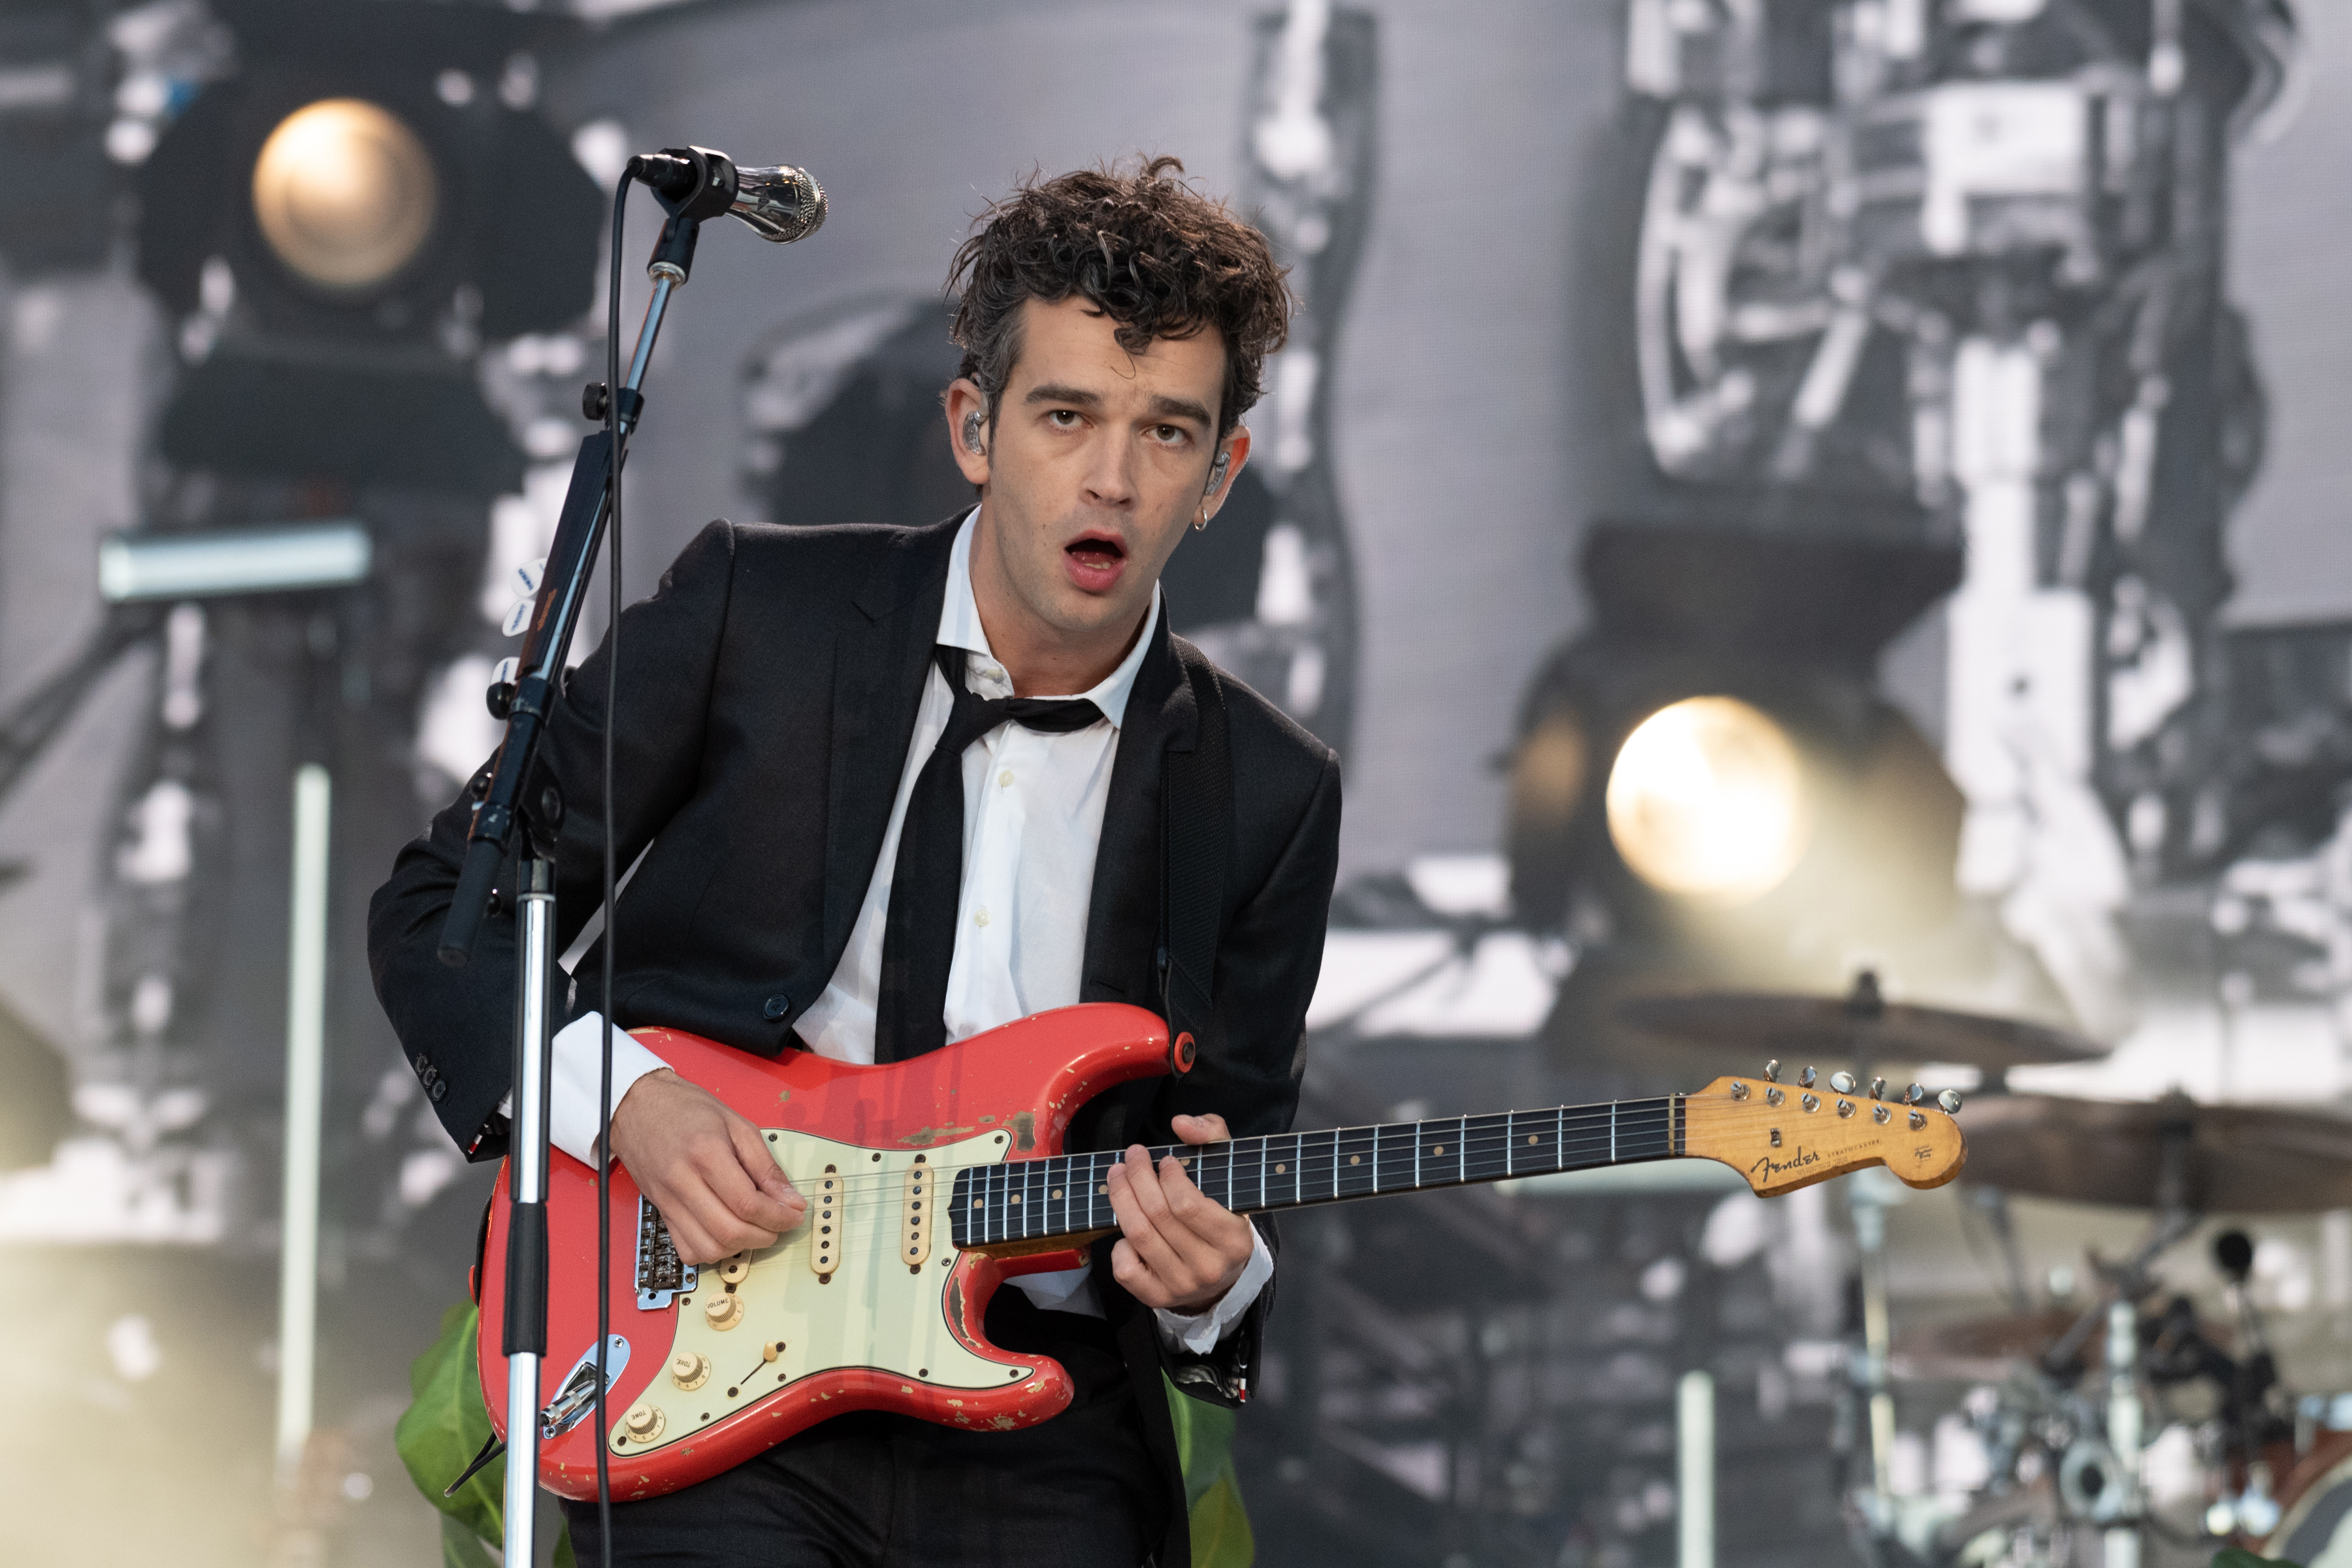 Matty Healy, wearing a black suit and white shirt, performs on stage with a red electric guitar